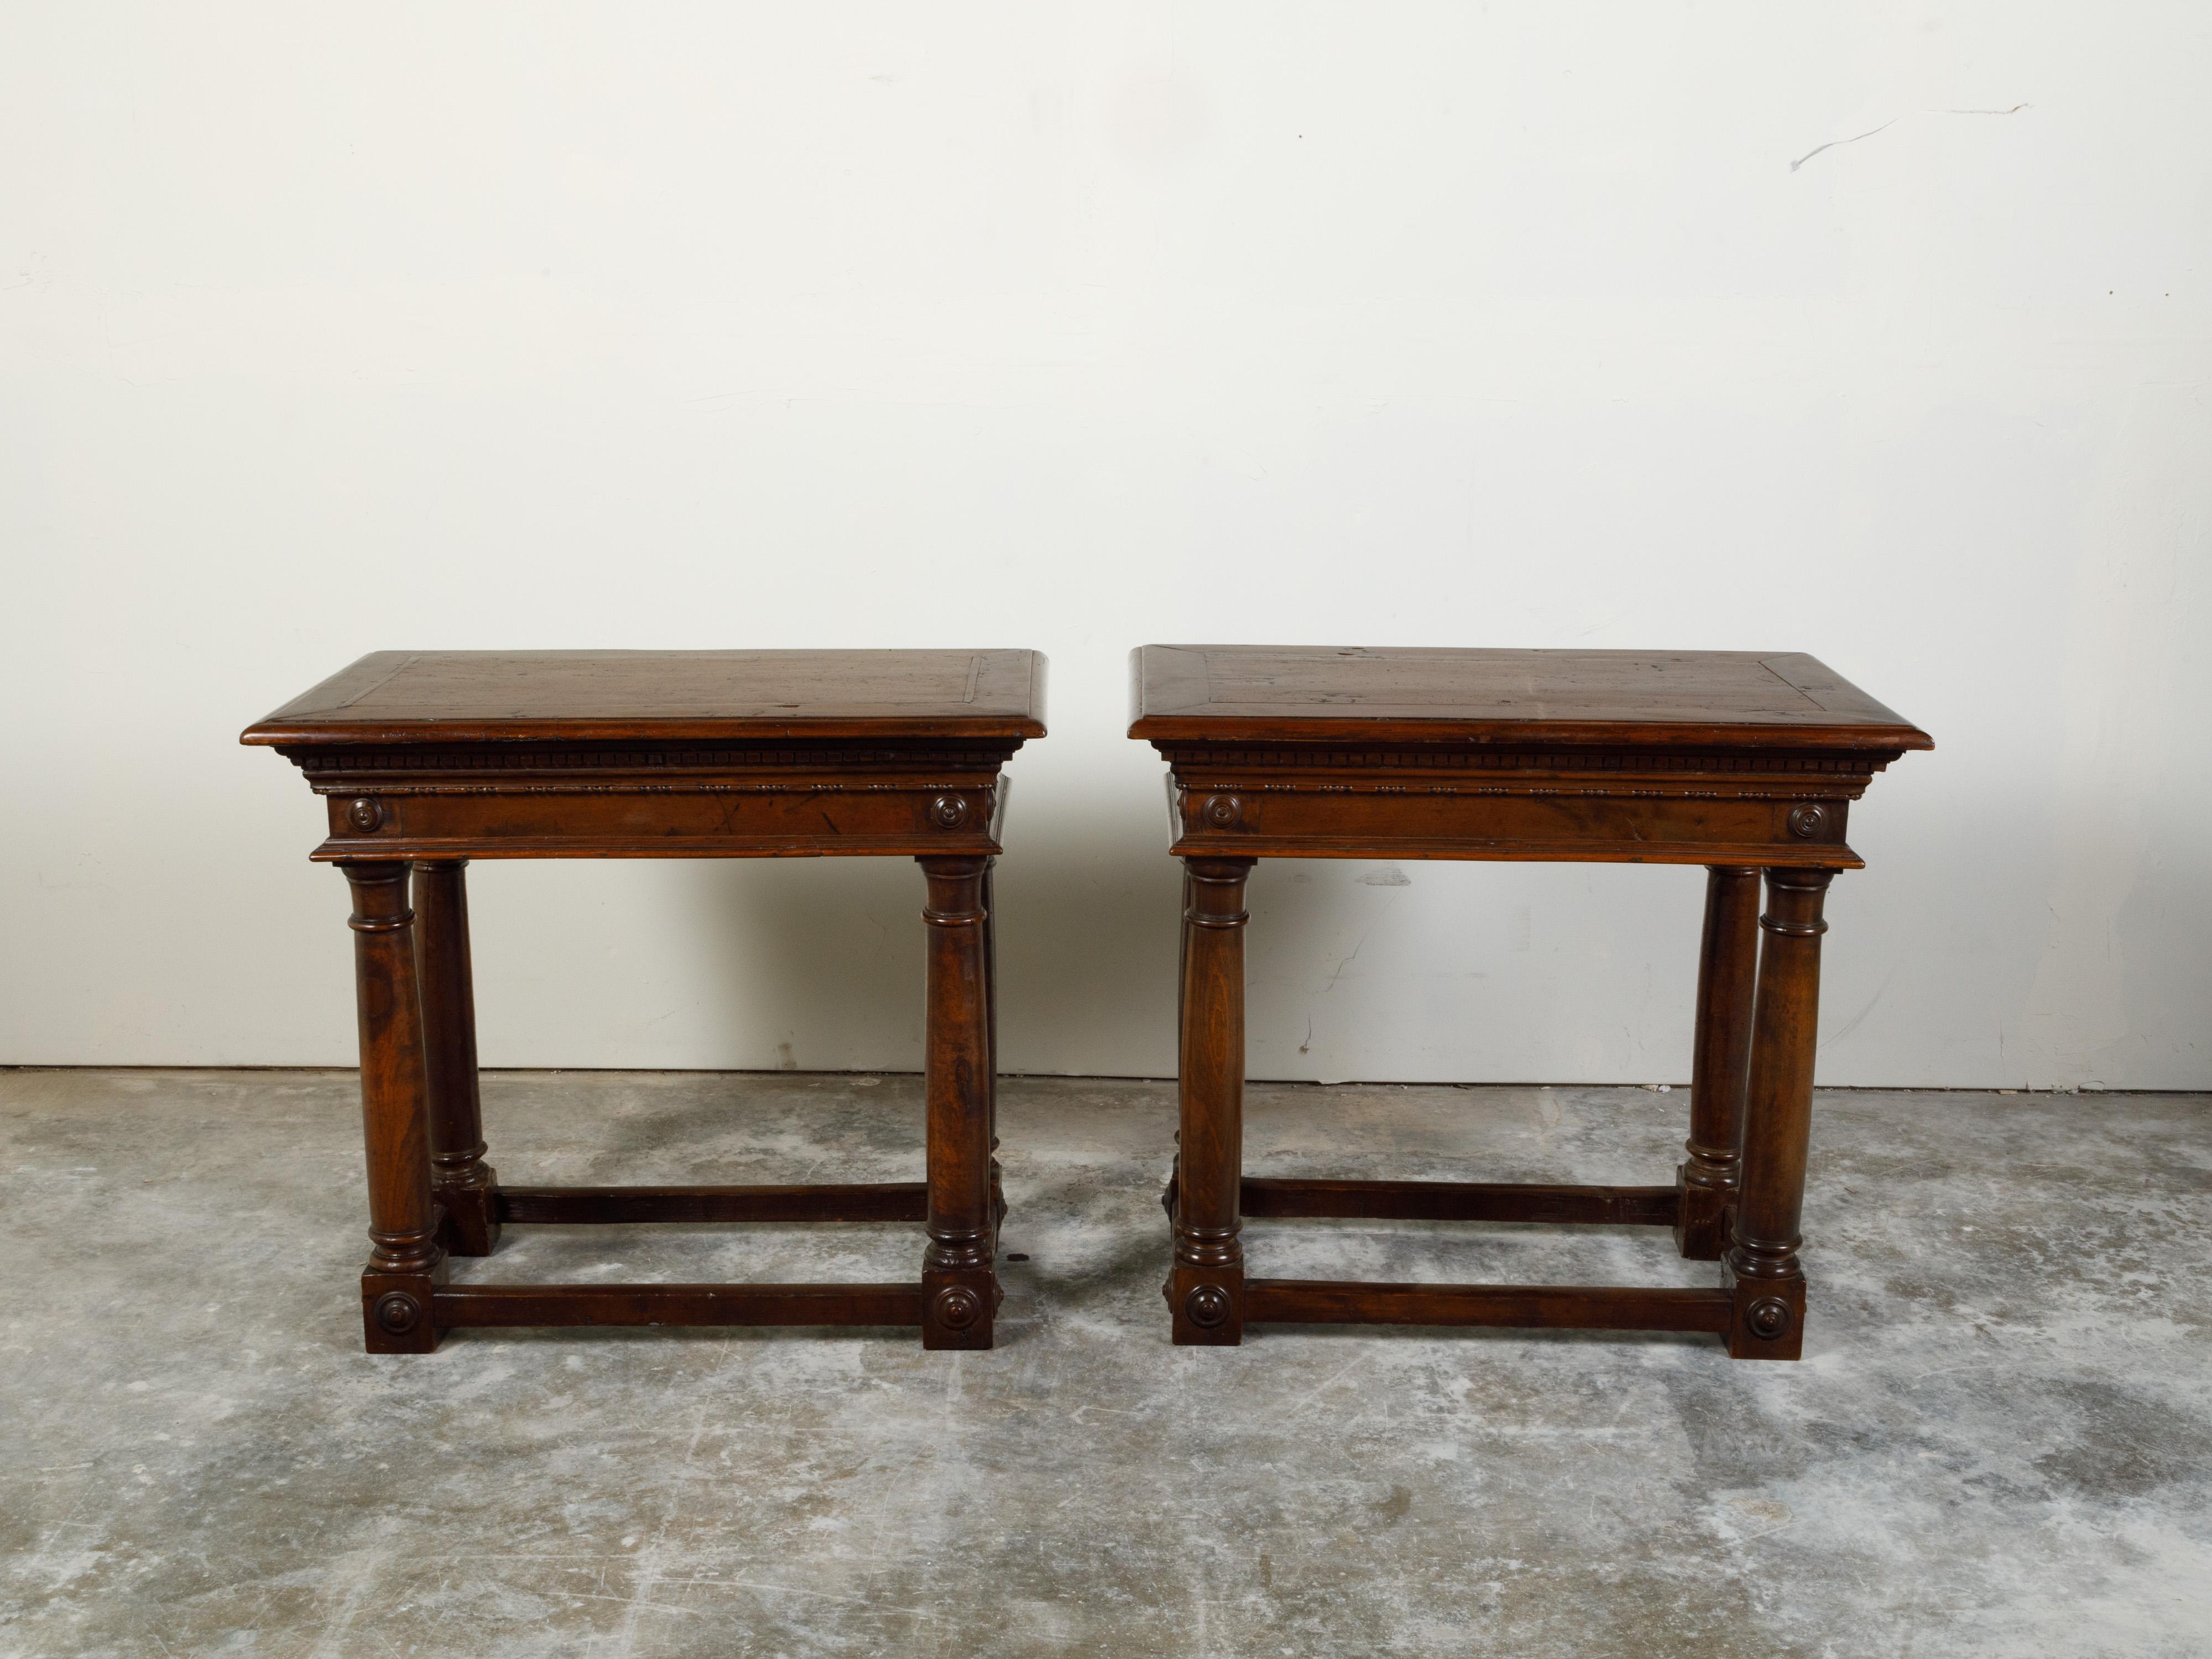 A Pair of Italian walnut console tables from the 19th century, with carved dentil molding and Doric columns. Created in Italy during the 19th century, each of this pair of walnut console tables features a rectangular top with beveled edges, sitting